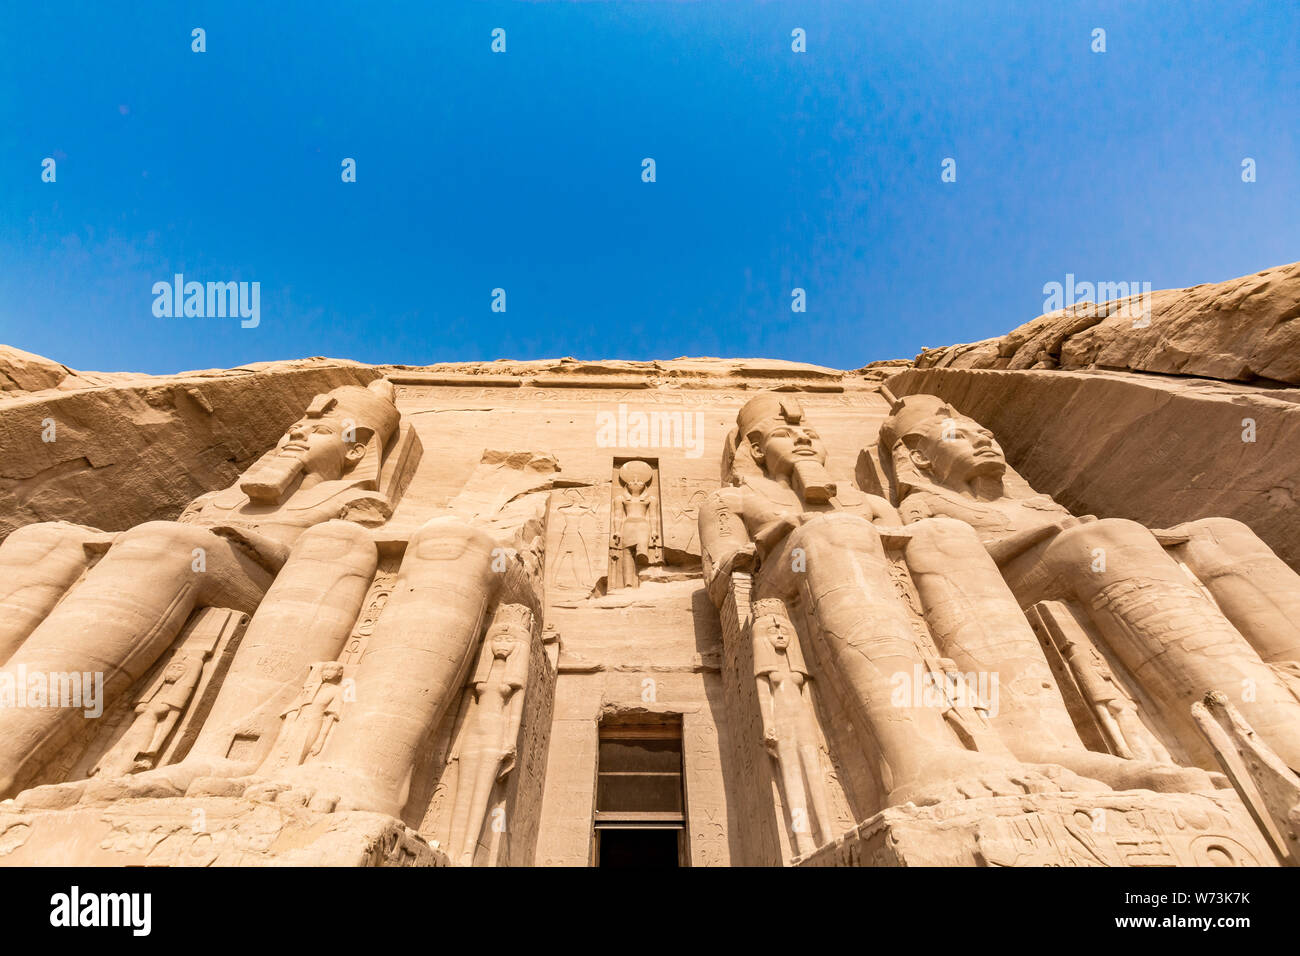 Abu Simbel temple, a magnificent landmark built by pharaoh Ramesses the Great, Egypt Stock Photo